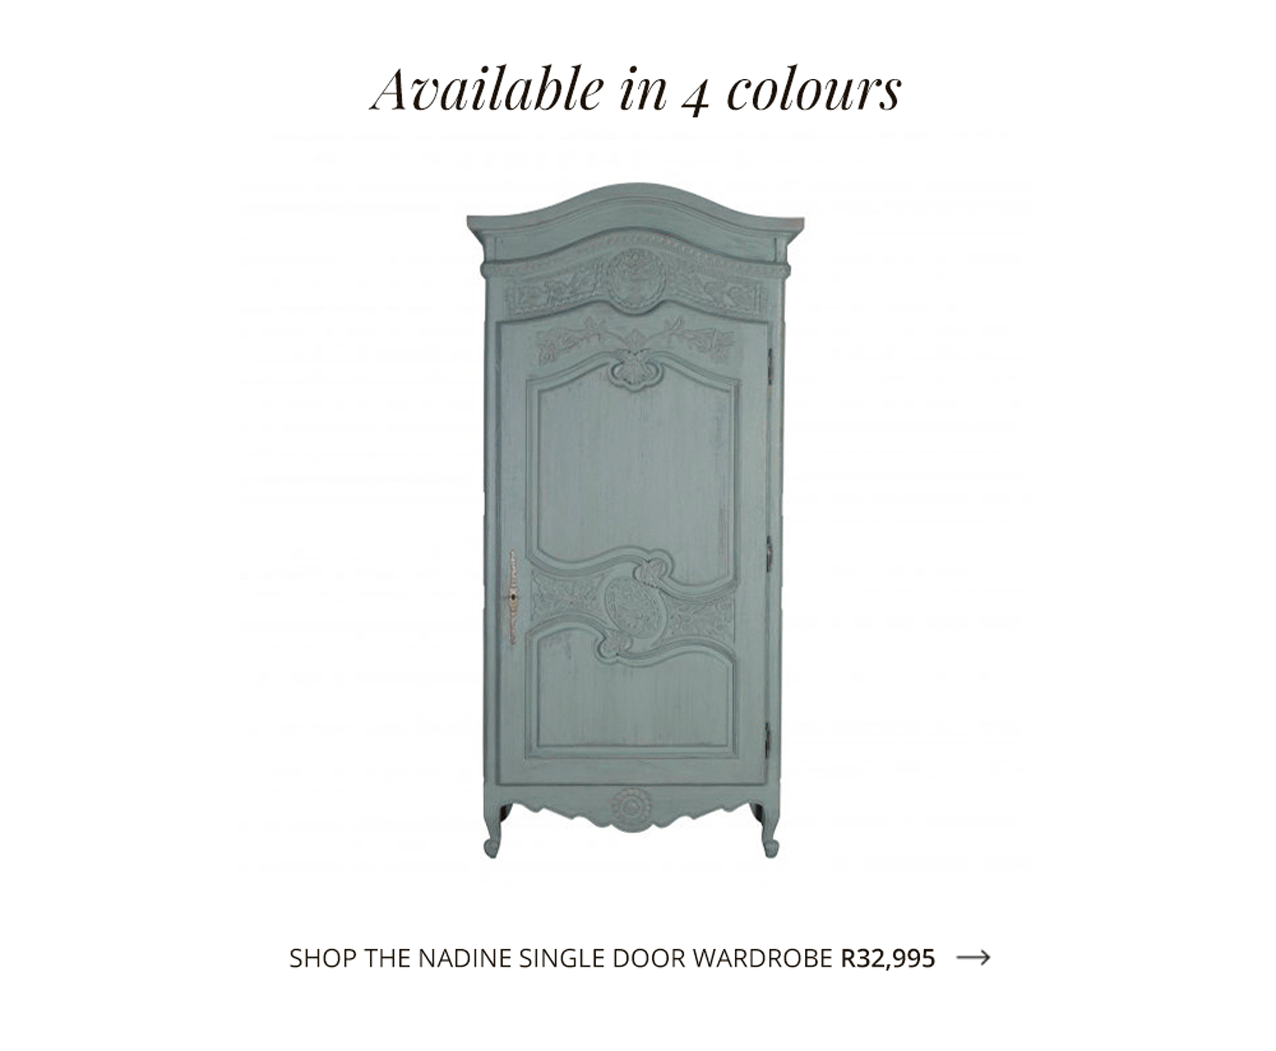 Intricately and beautifully hand-carved motifs and arched silhouette gives the Nadine Wardrobe Marie Antoinette-like flair. Available in 4 colour-washes, these limited edition cupboards have 2 removable shelves for flexible storage options.